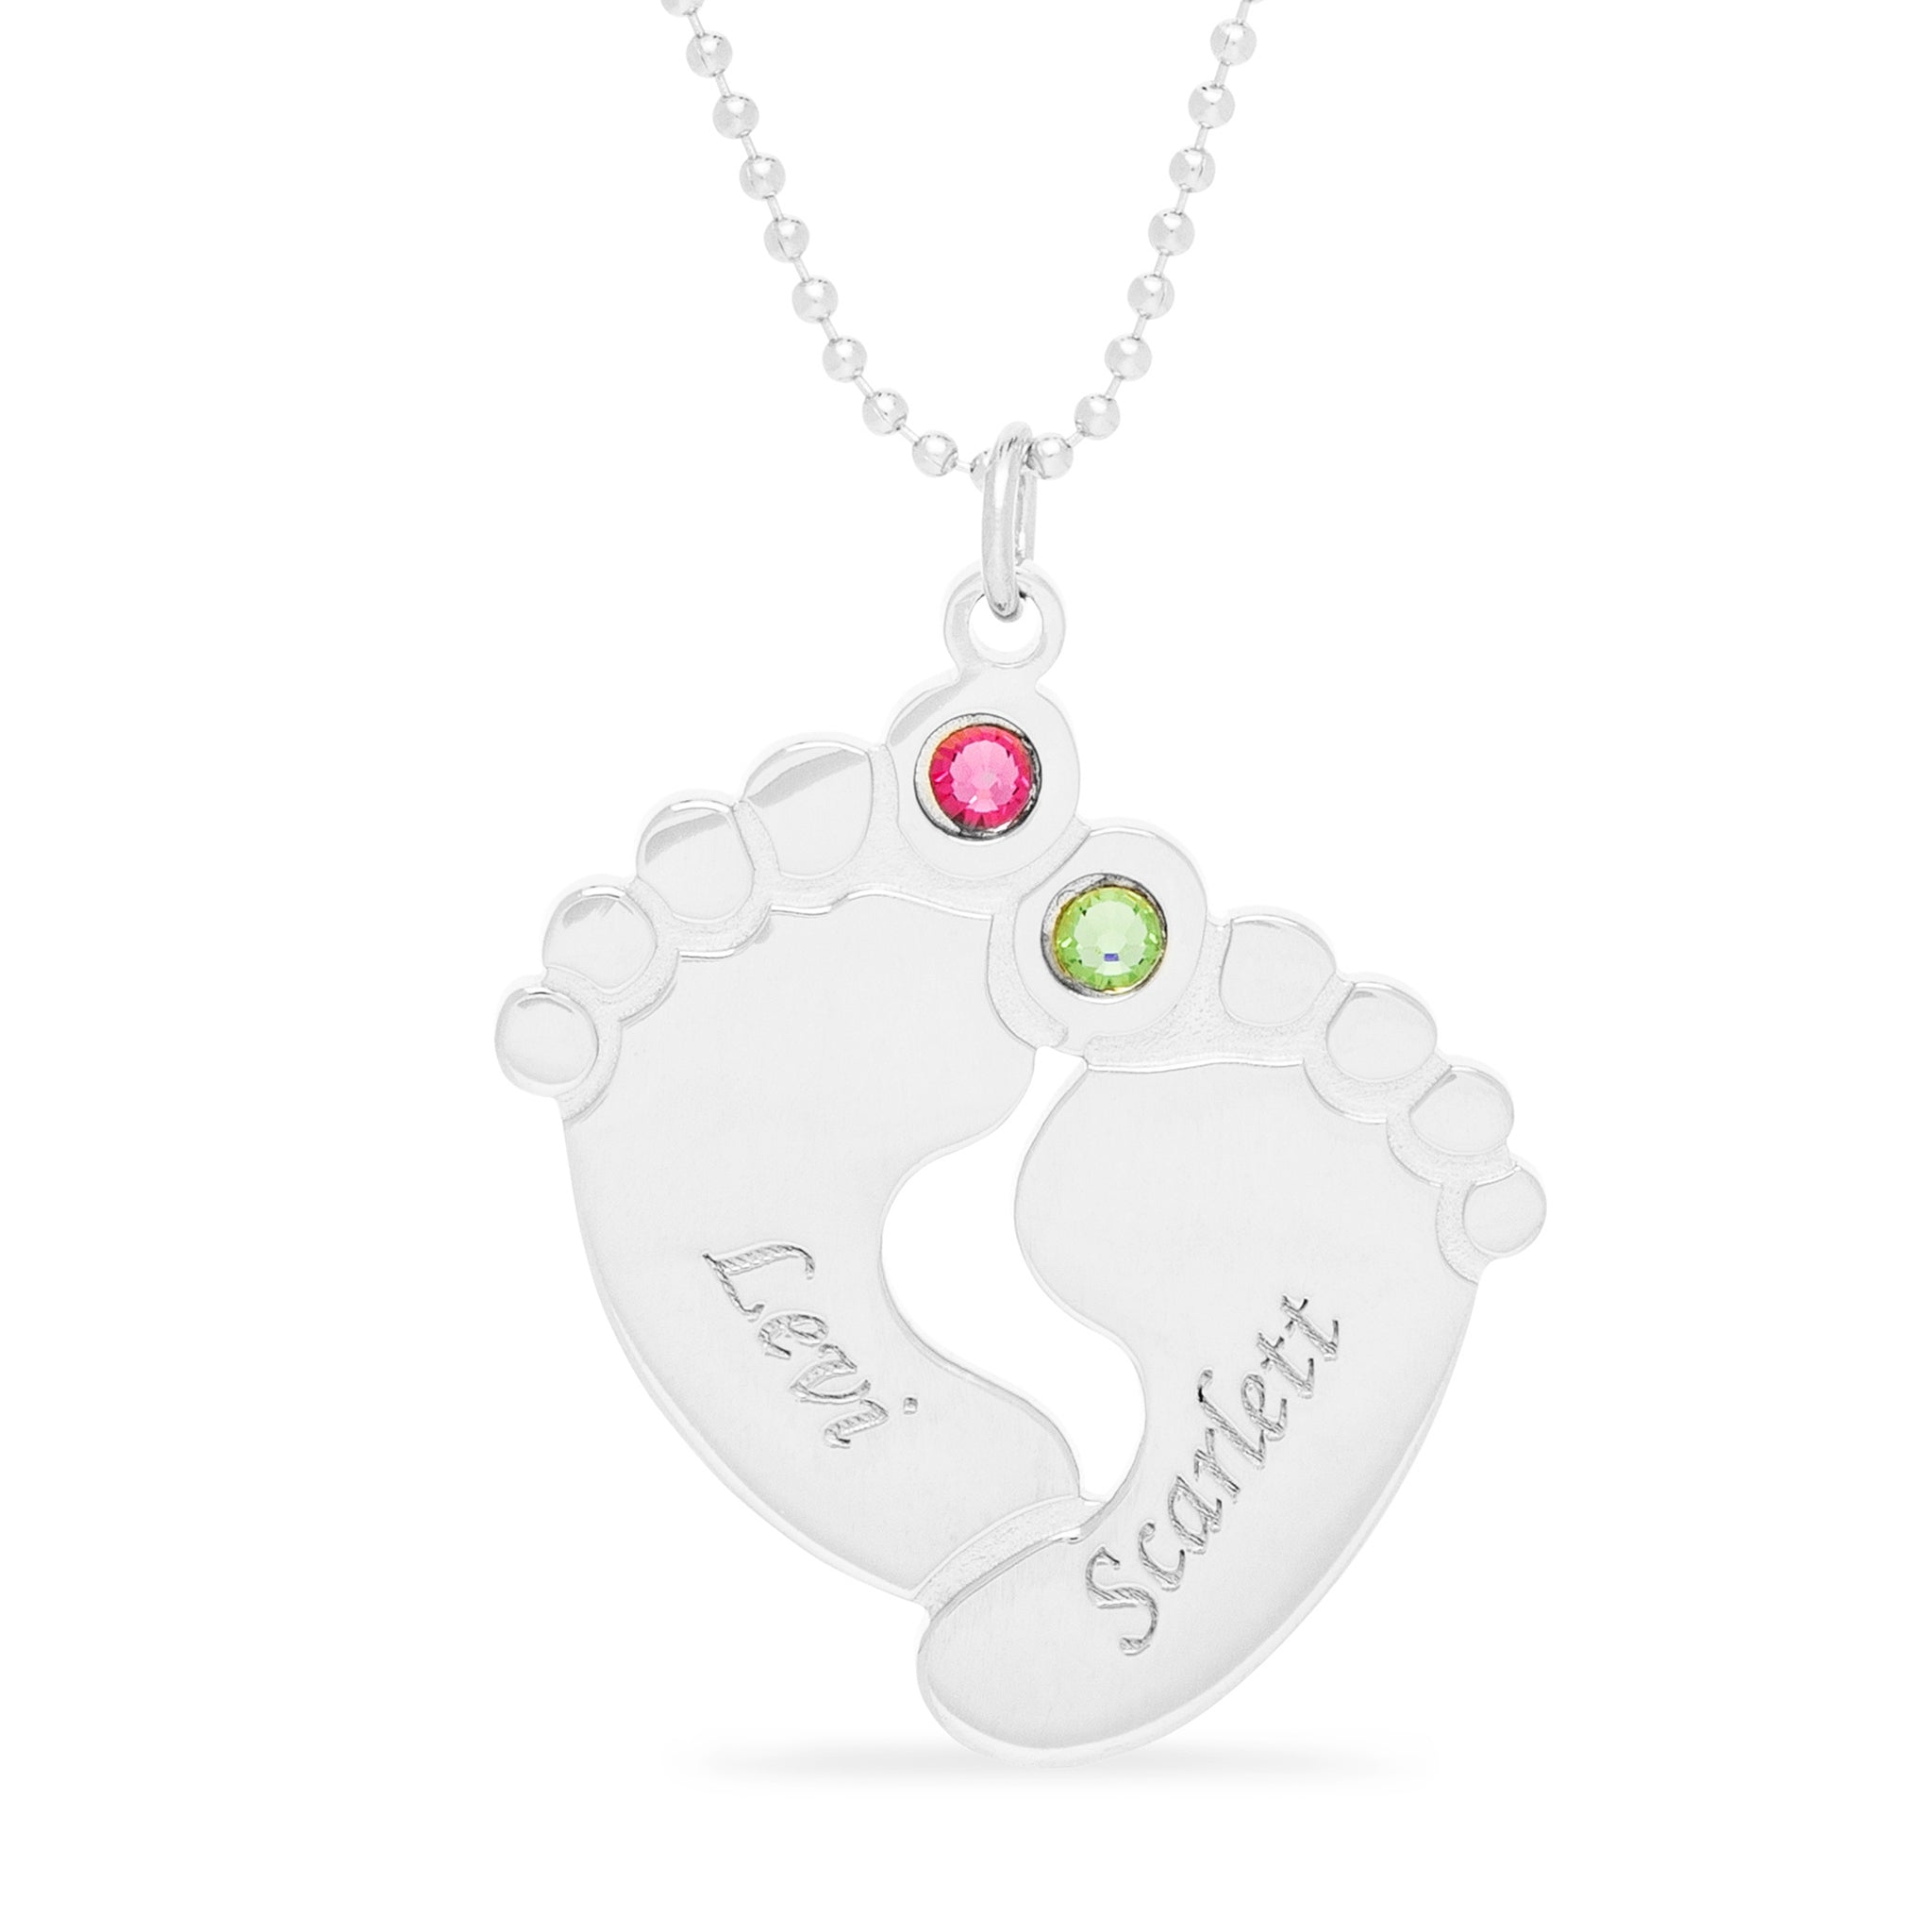 New Life Baby Feet Necklace - Two Names